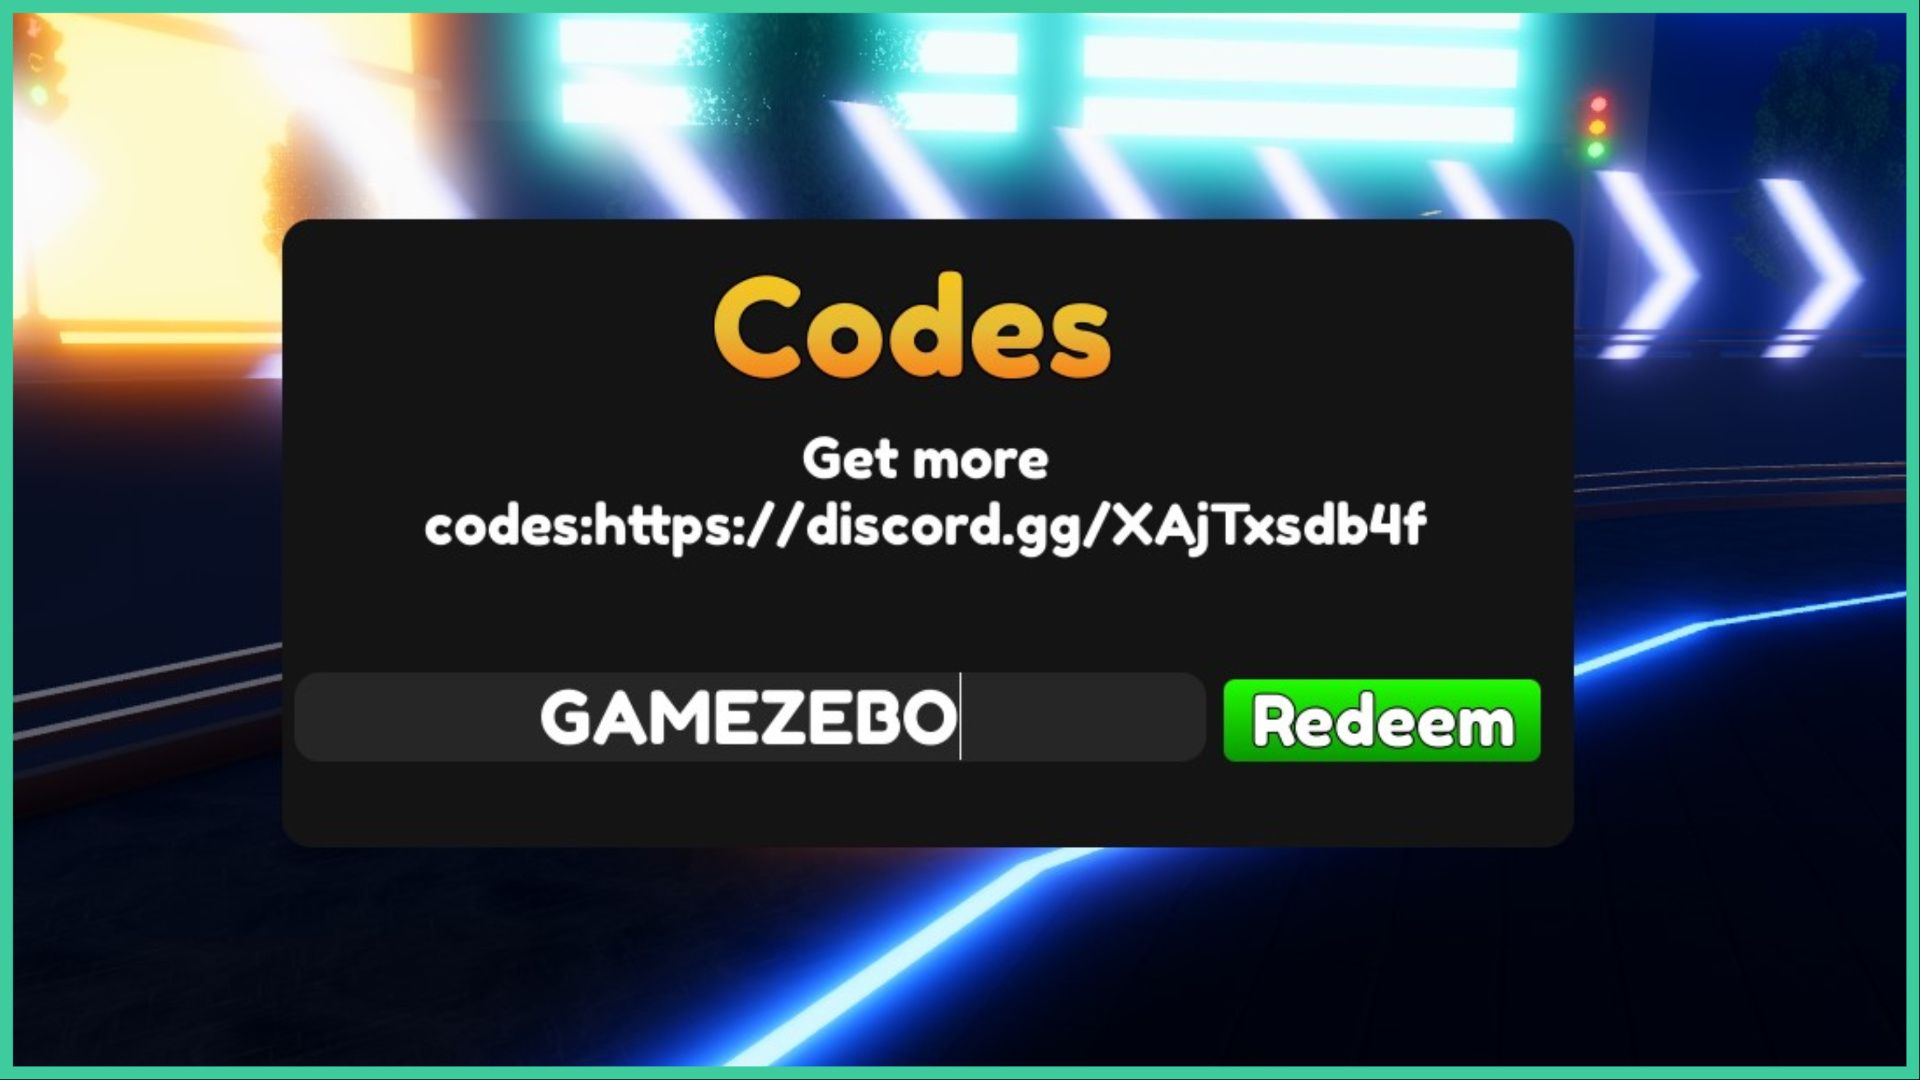 screenshot of the code redemption window for our anime fantasy codes guide, the text box says 'GAMEZEBO' and there's a green 'redeem' button to the right of it, as well as a link that takes you to the game's discord server, in the background is a neon glowing city with traffic lights and neon arrows that point to the right